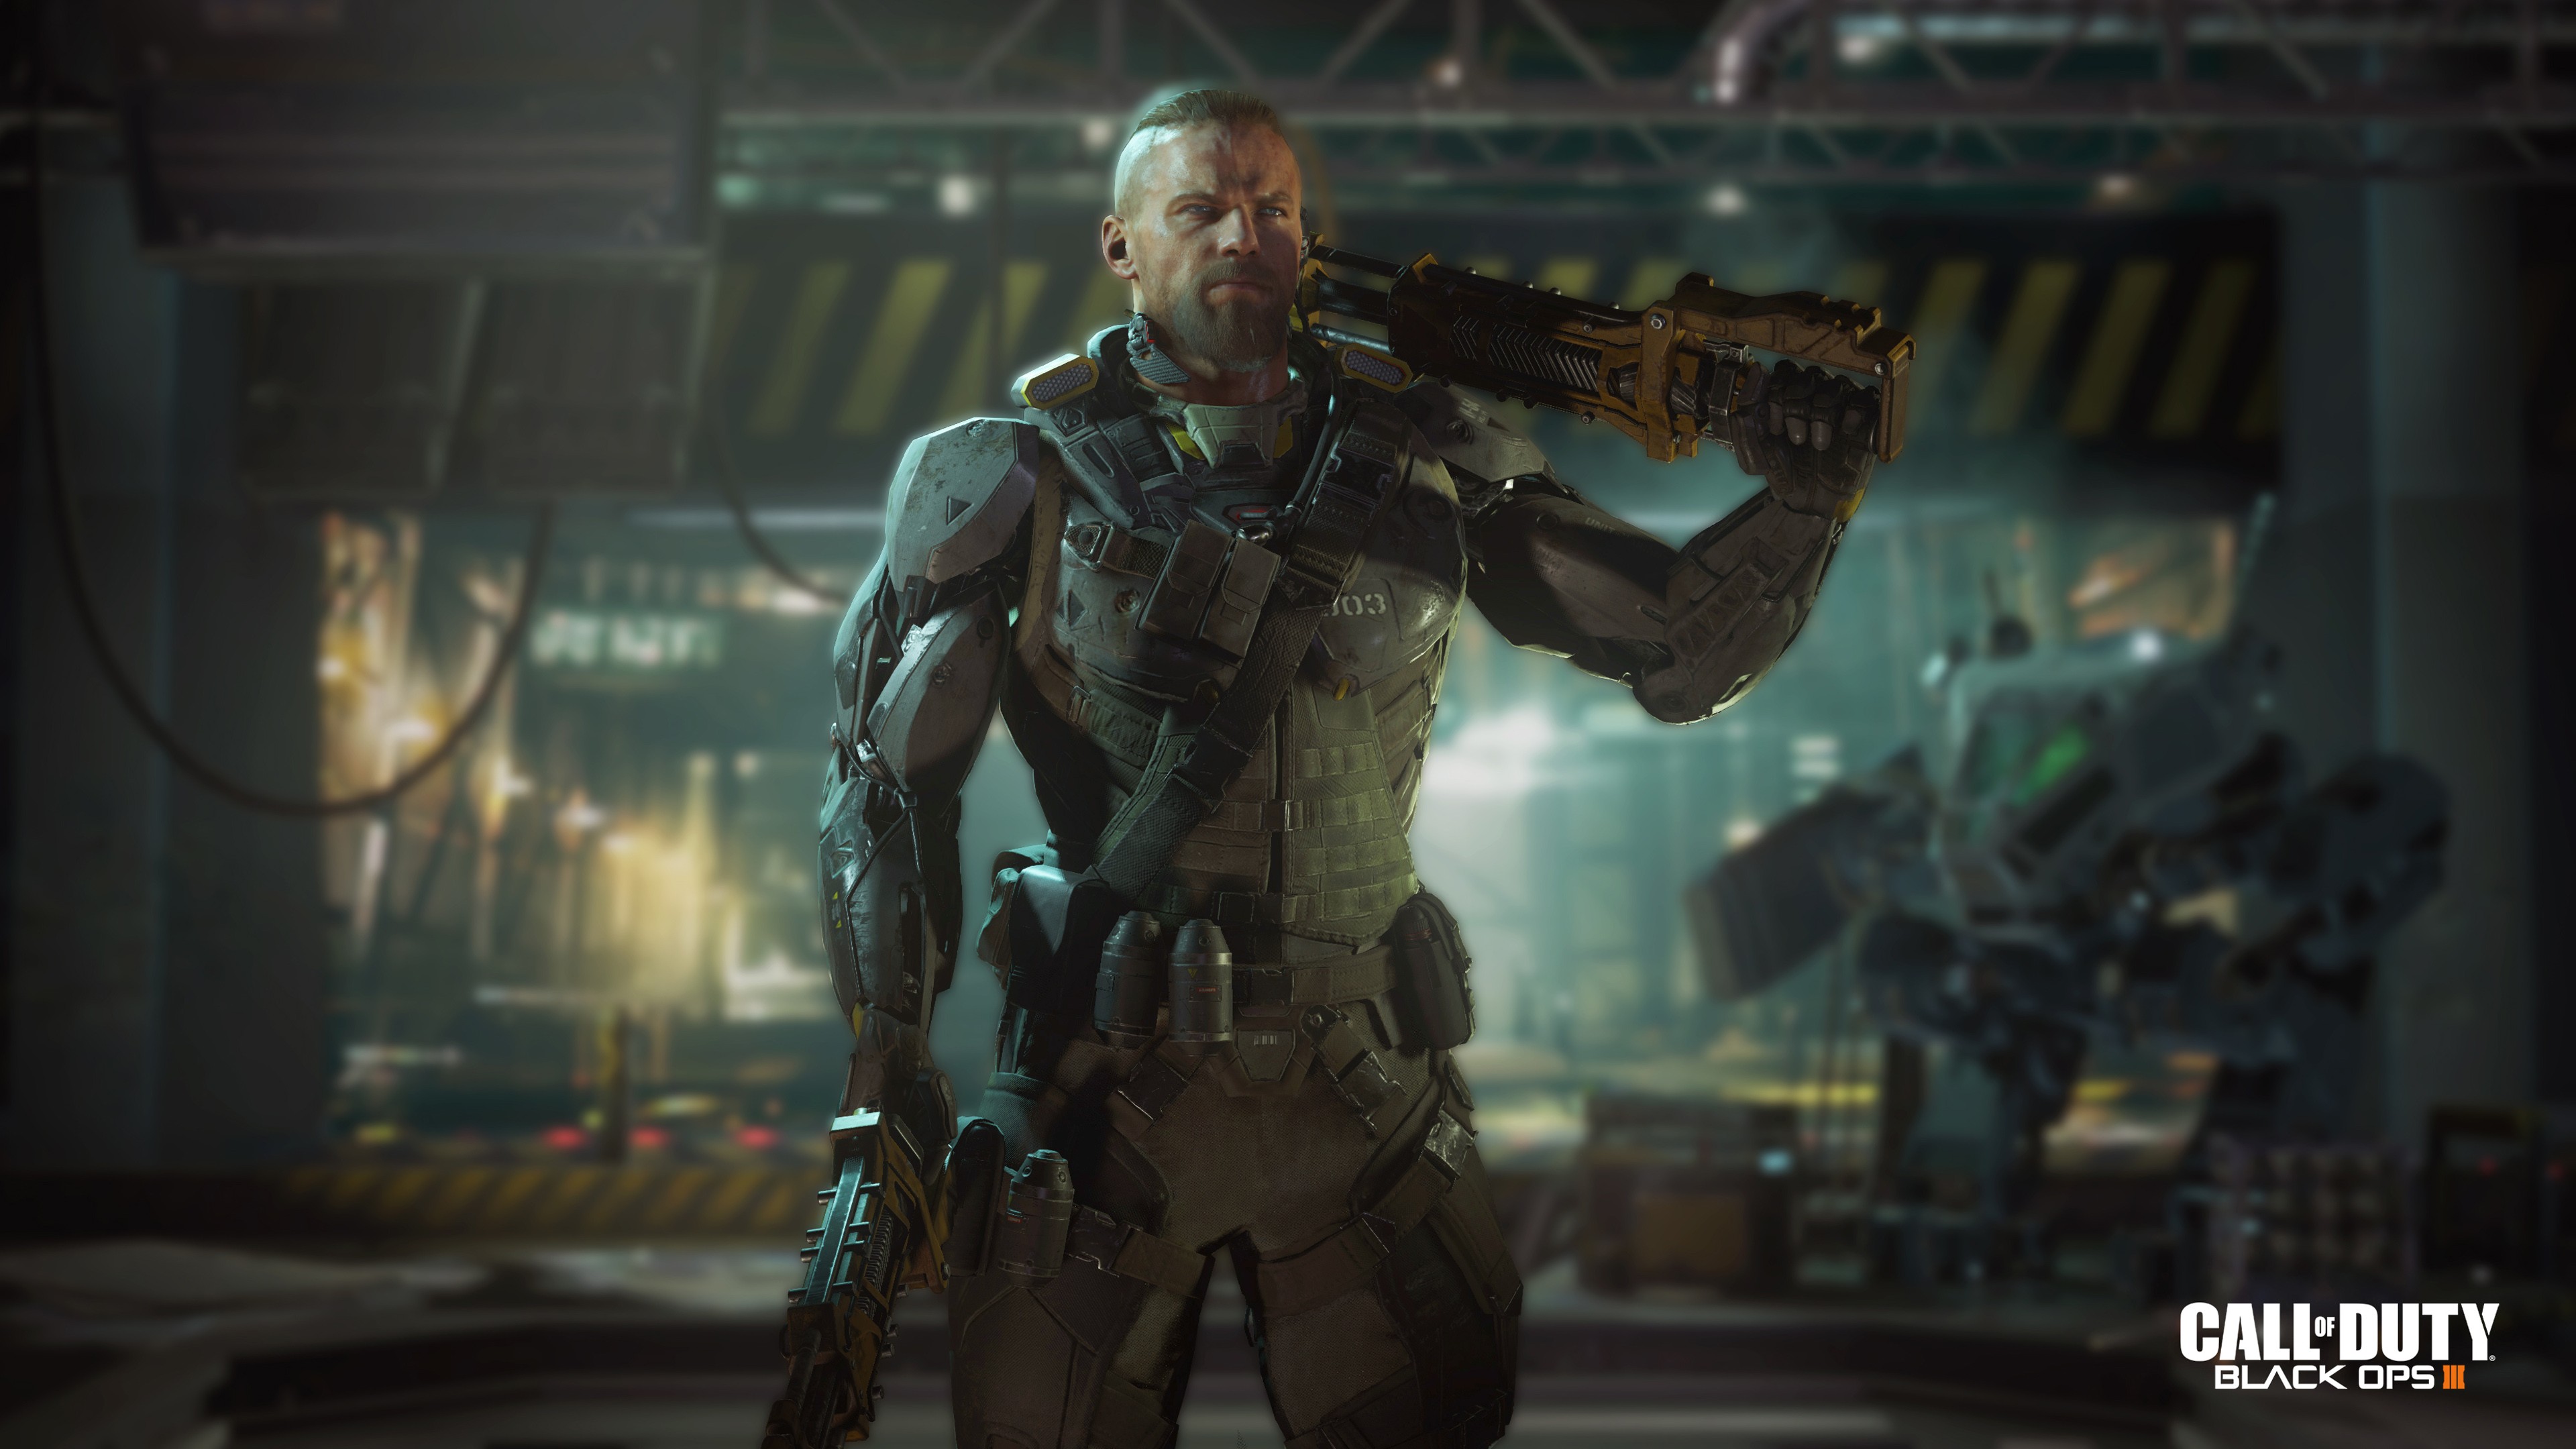 Call Of Duty Black Ops Specialist Image New HD Wallpaper